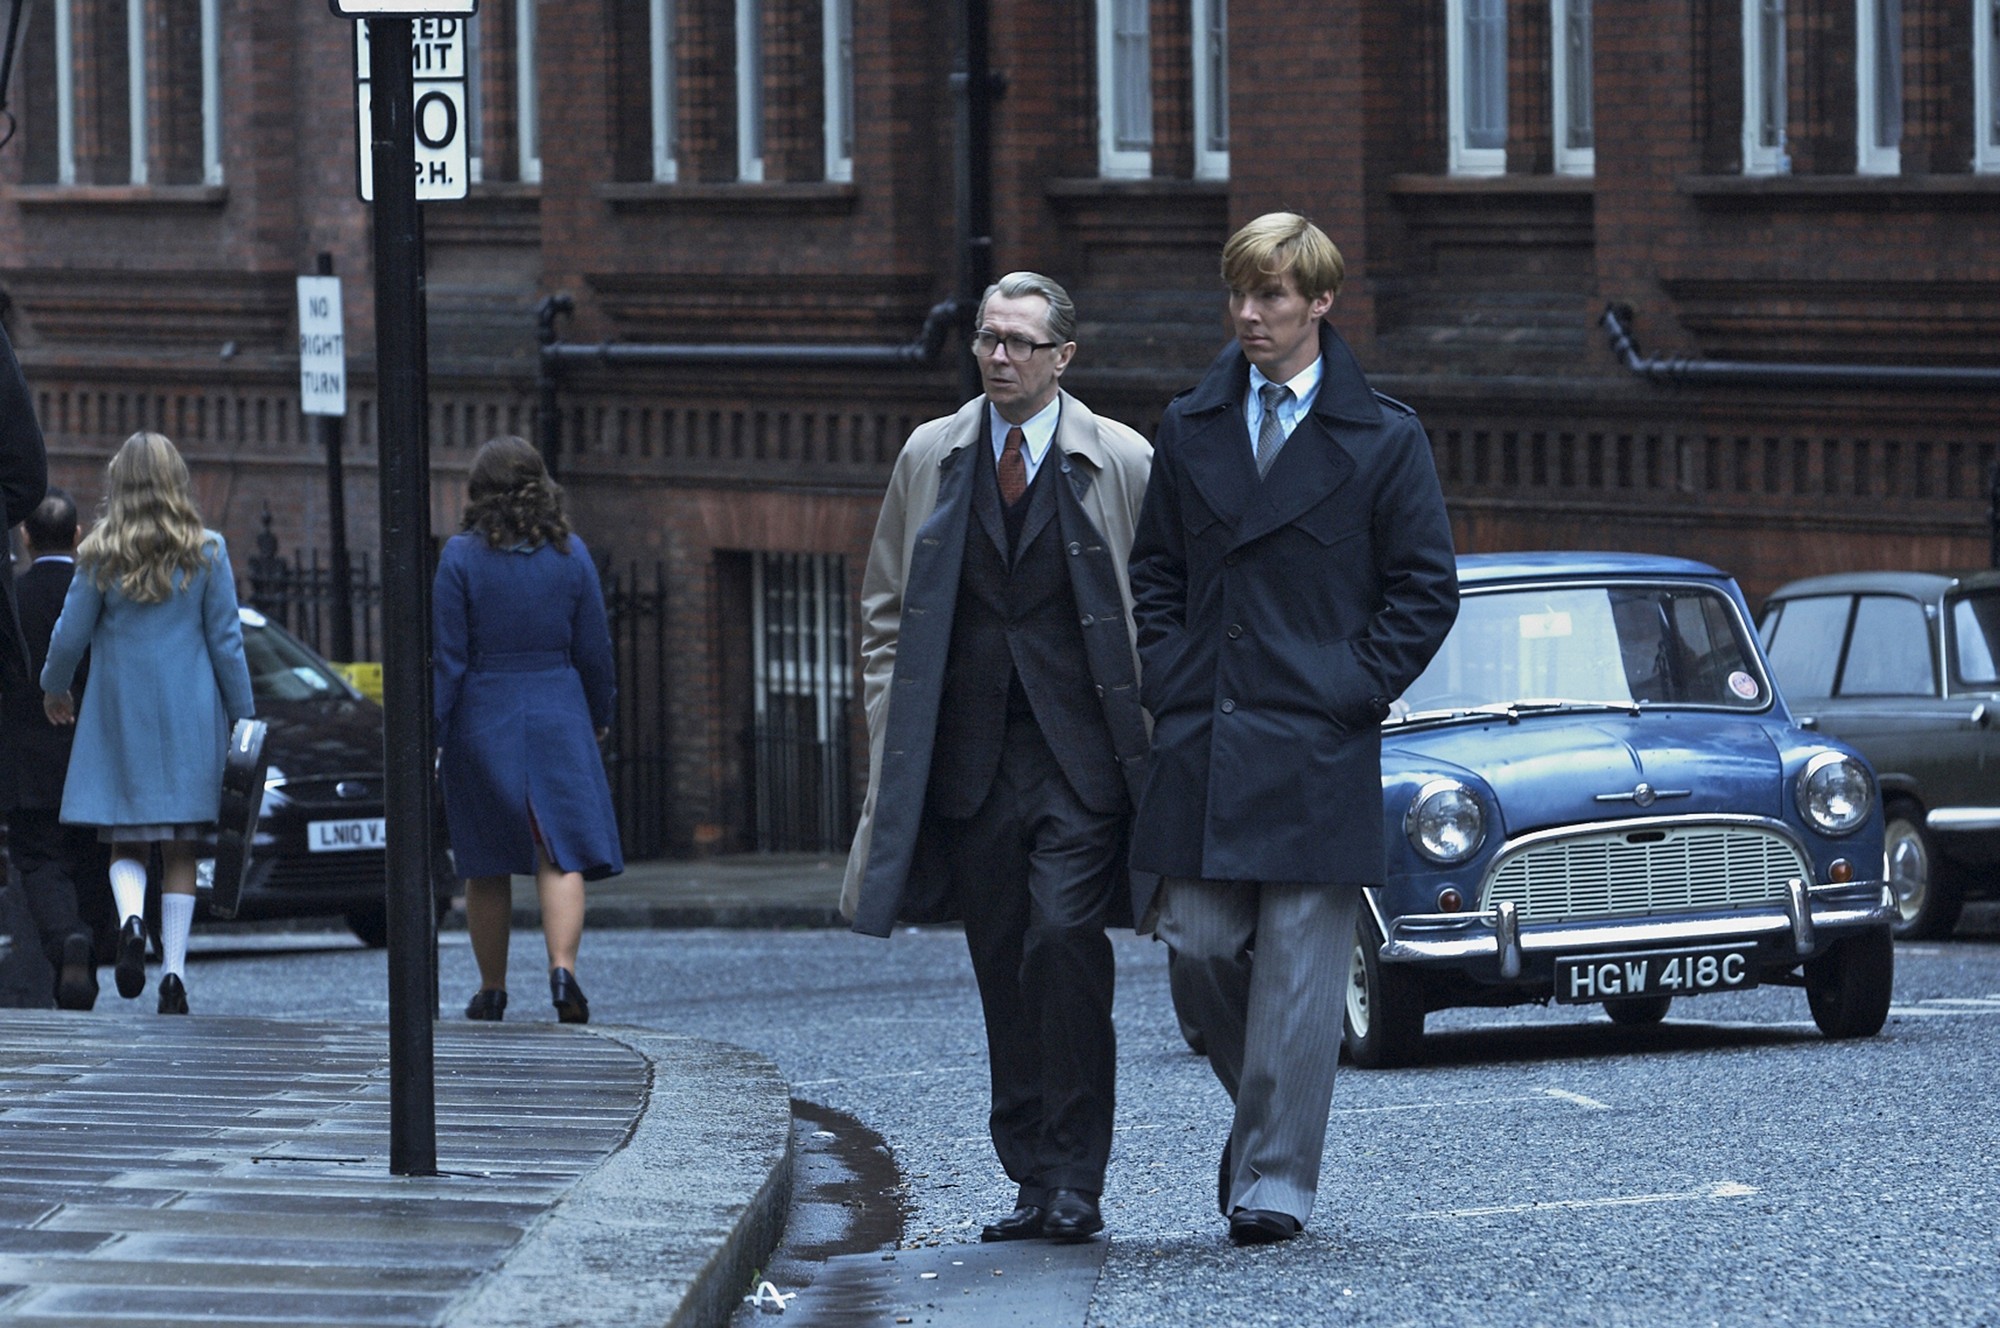 Gary Oldman stars as George Smiley and Benedict Cumberbatch stars as Peter Guillam in Focus Features' Tinker, Tailor, Soldier, Spy (2011)